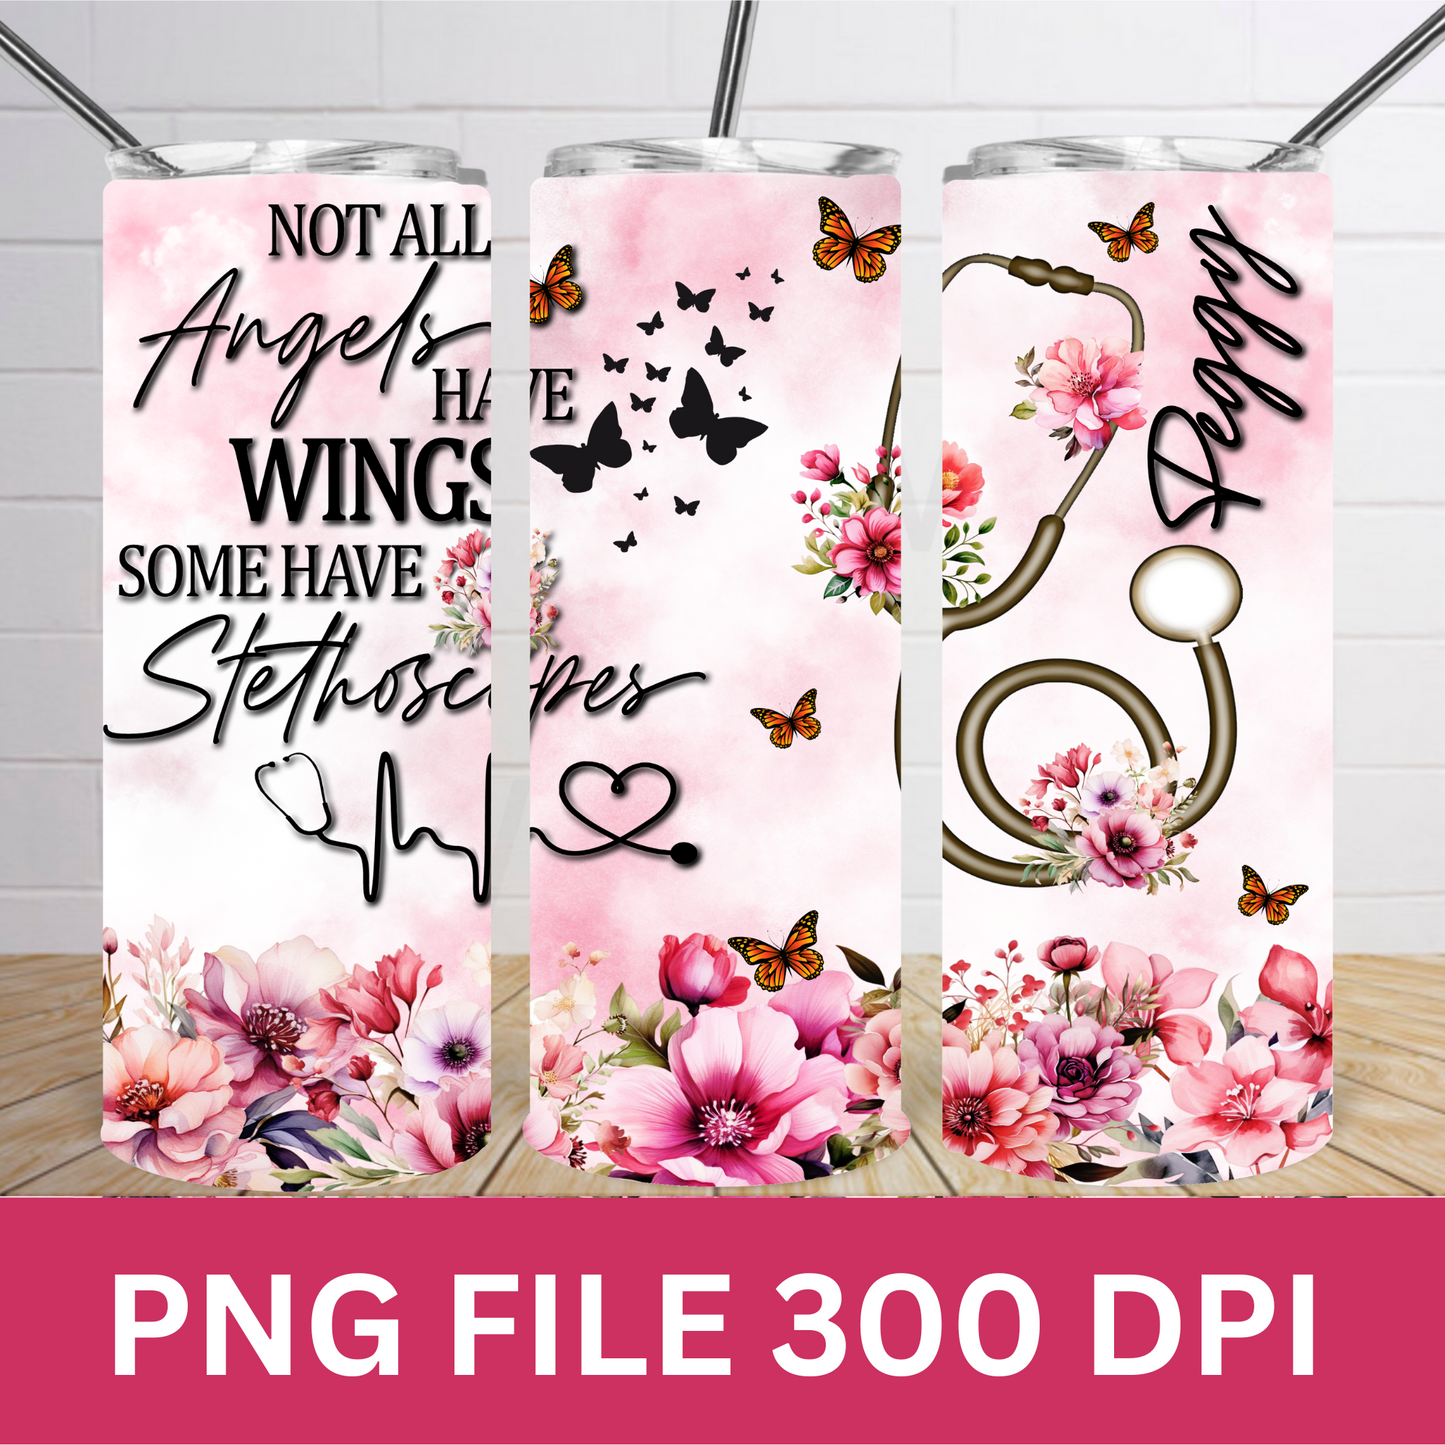 Not All Angels Have Wings Some Have Stethoscopes Sublimation Tumbler Wrap PNG, Personalize with Name